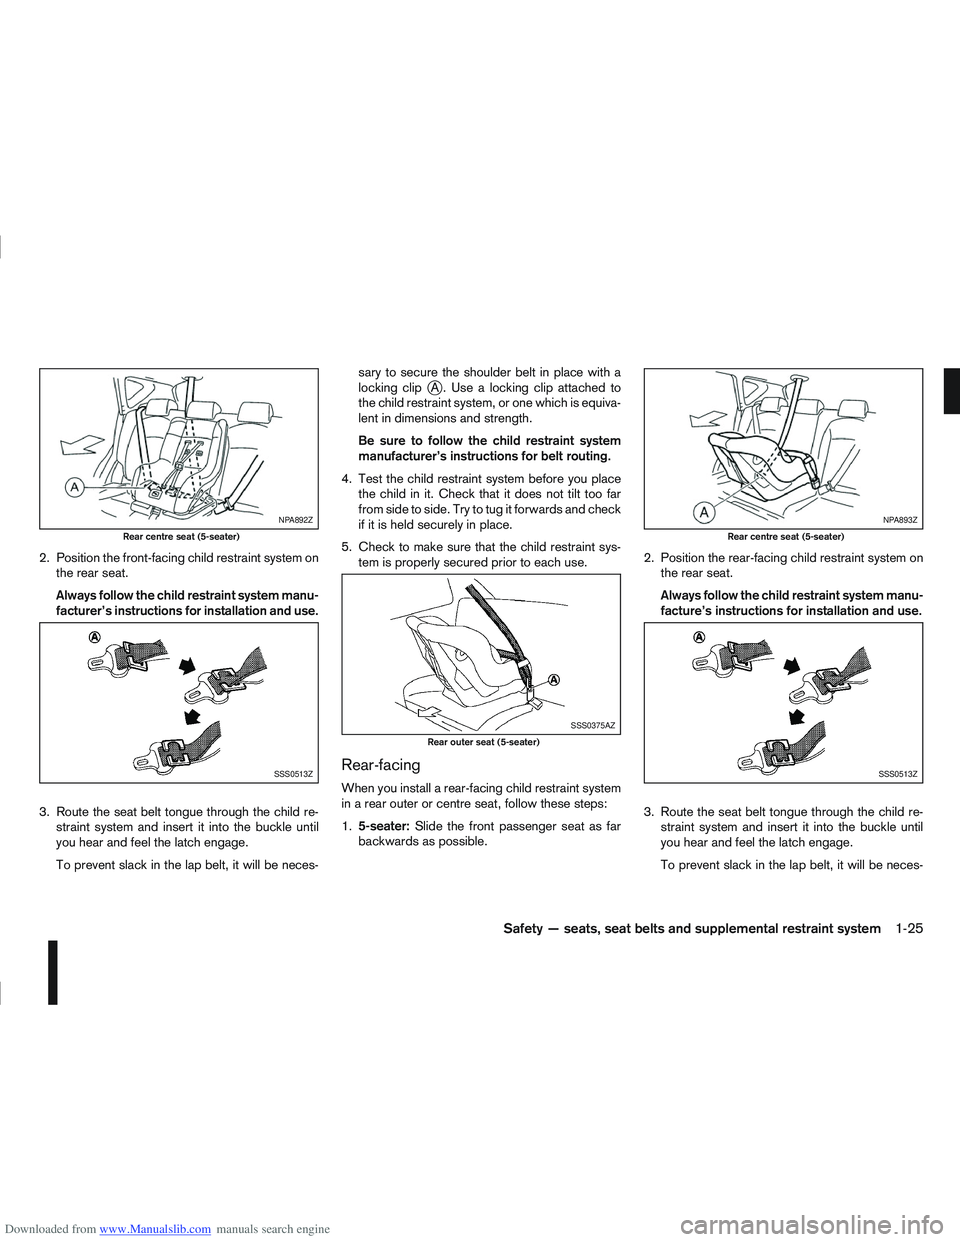 NISSAN QASHQAI 2006 Service Manual Downloaded from www.Manualslib.com manuals search engine 2. Position the front-facing child restraint system onthe rear seat.
Always follow the child restraint system manu-
facturer’s instructions f